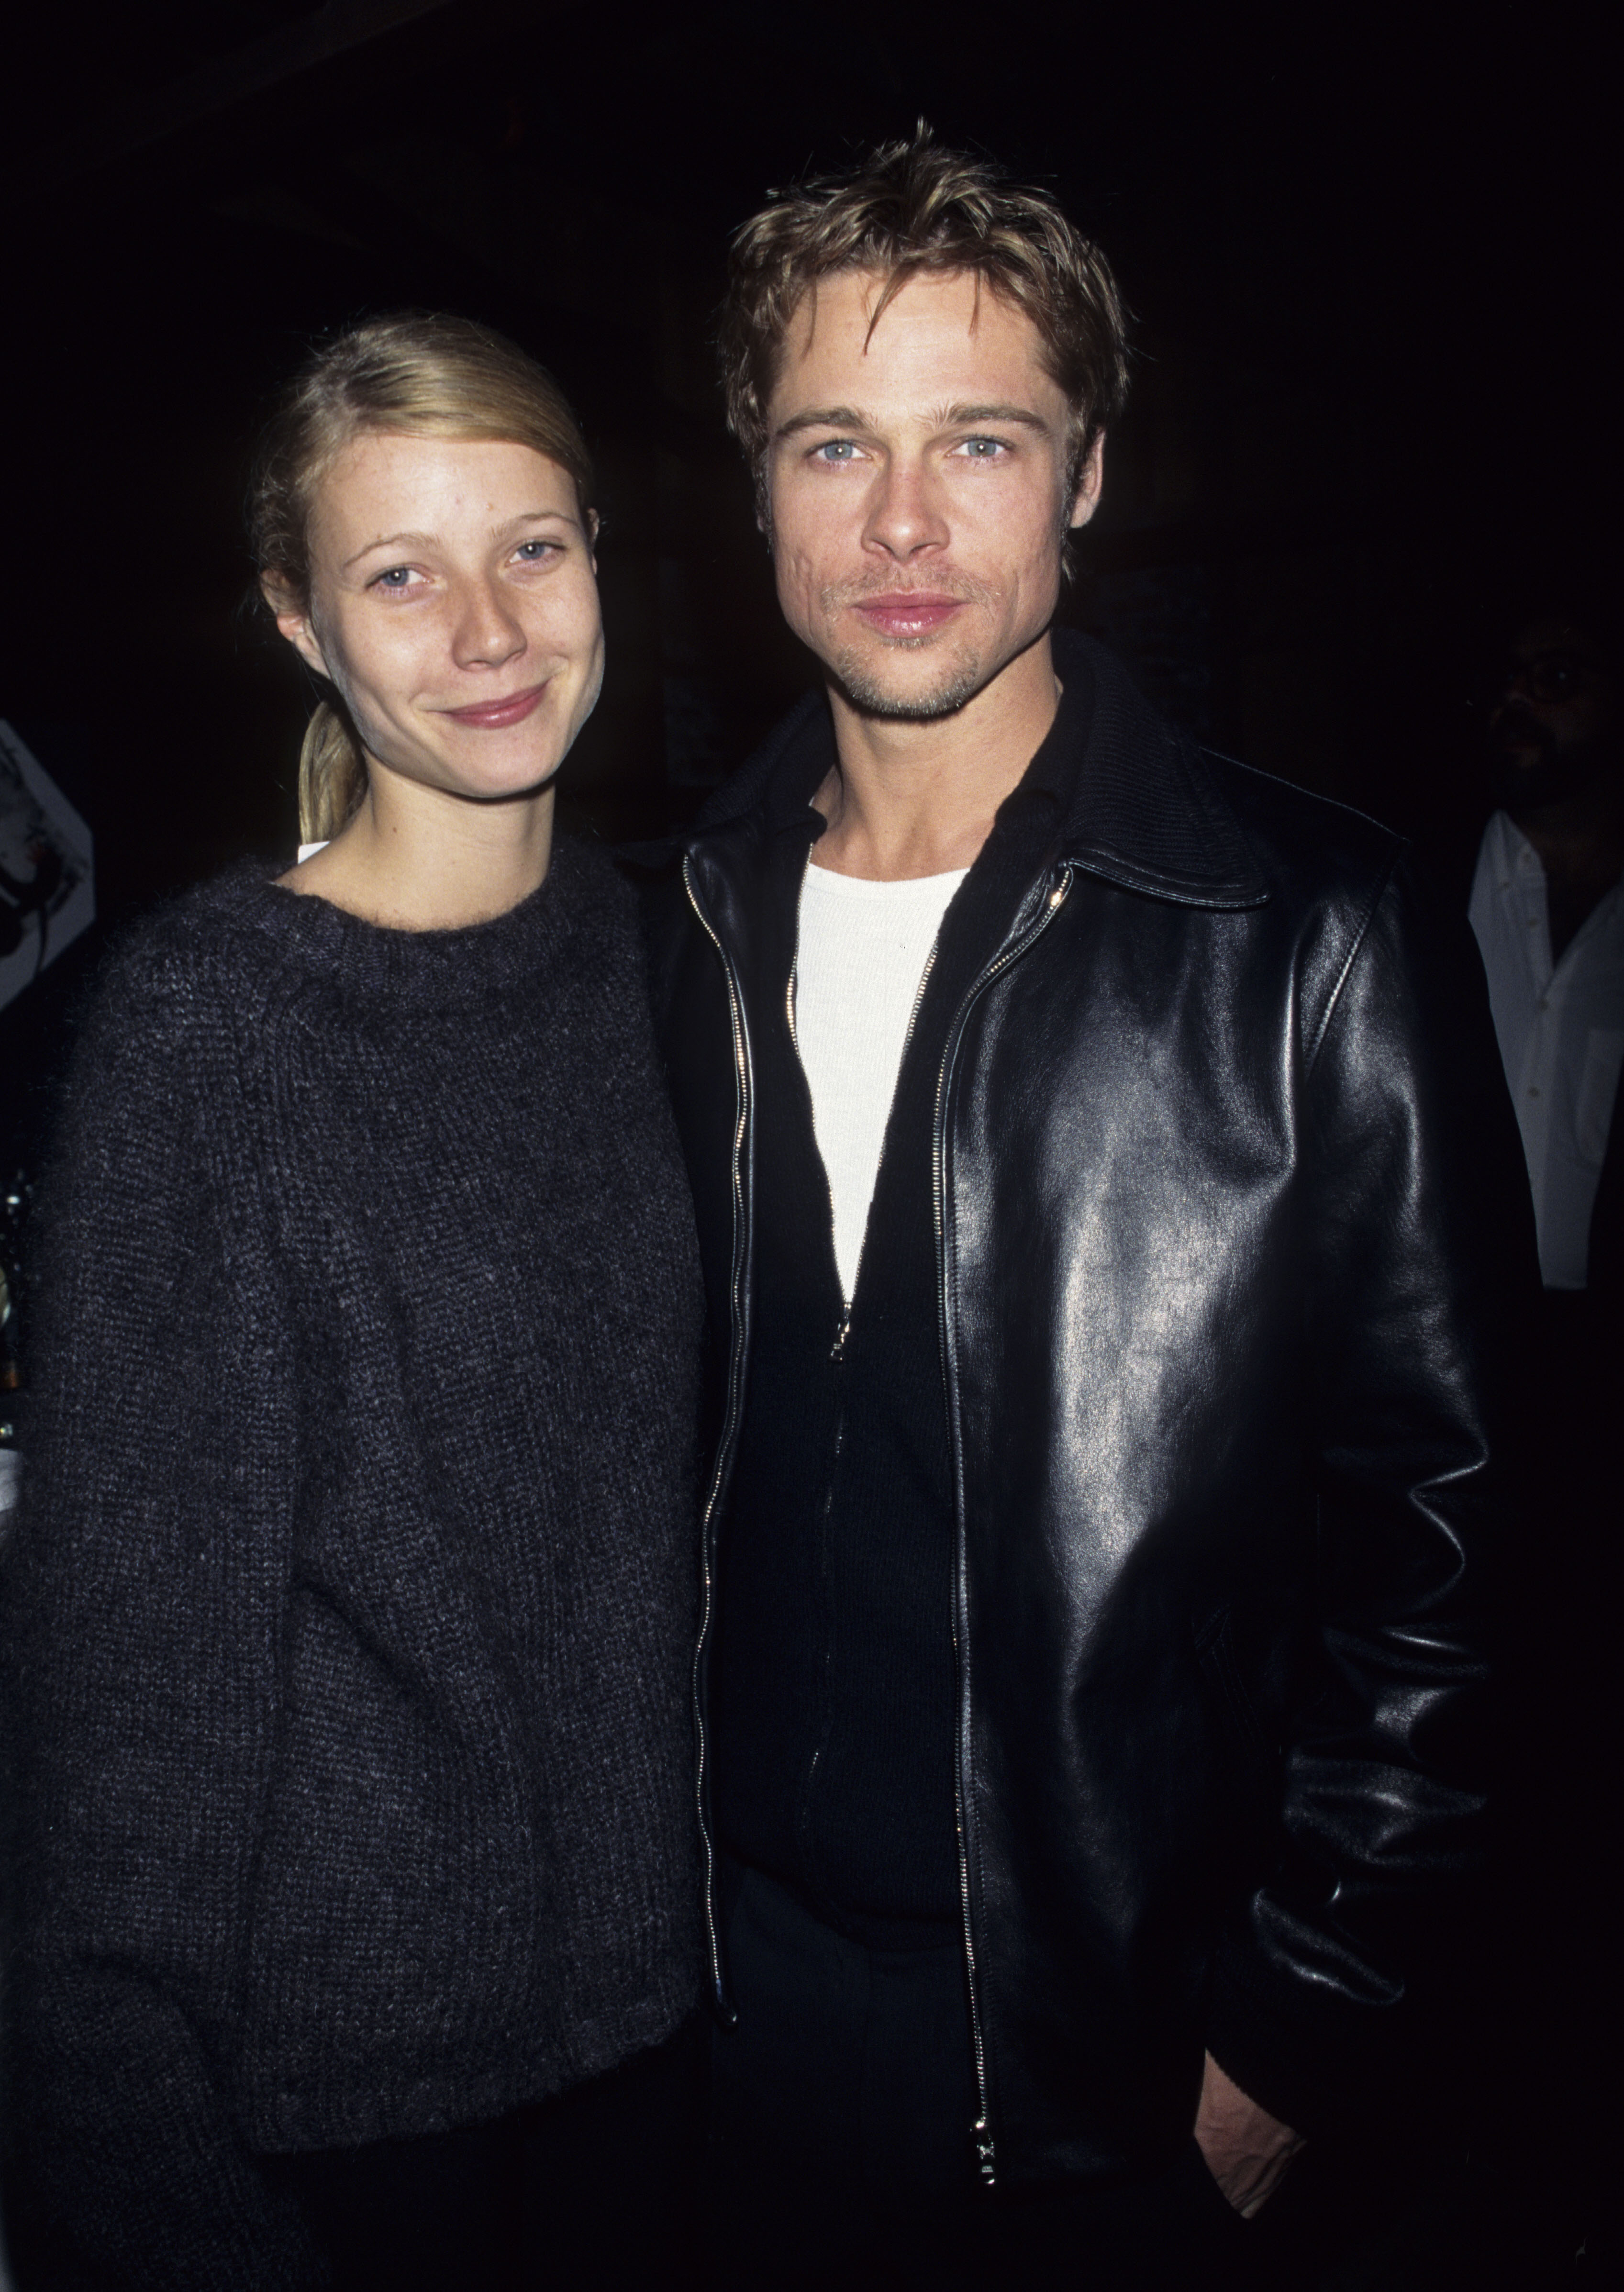 Gwyneth Paltrow and Brad Pitt at David Bowie's after-show party in an undated photo | Source: Getty Images